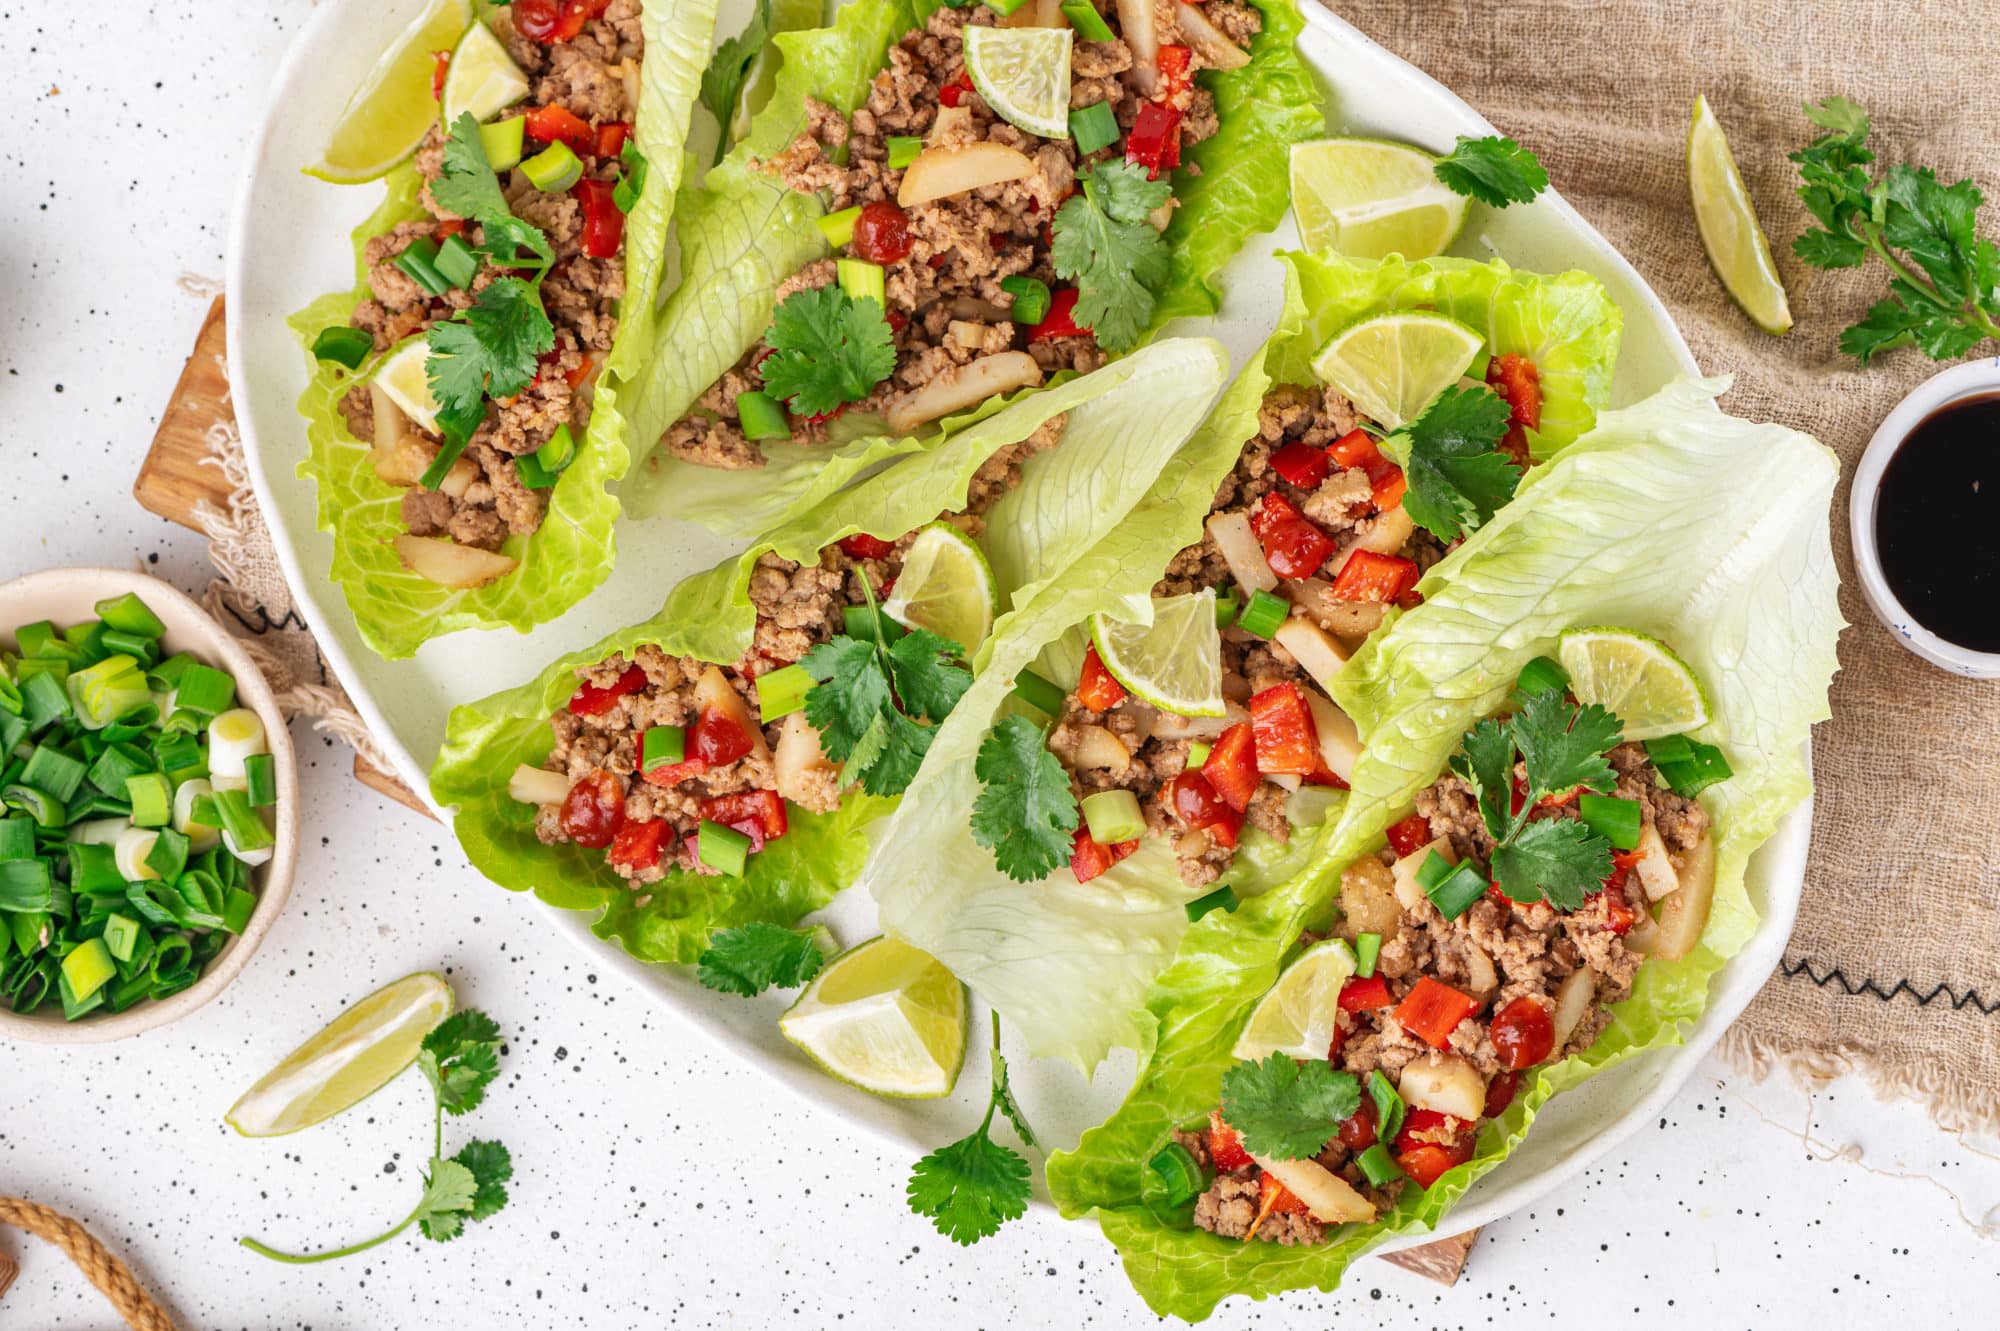 Top view of turkey lettuce wraps prepared with lime wedges and laid out on a white plate.